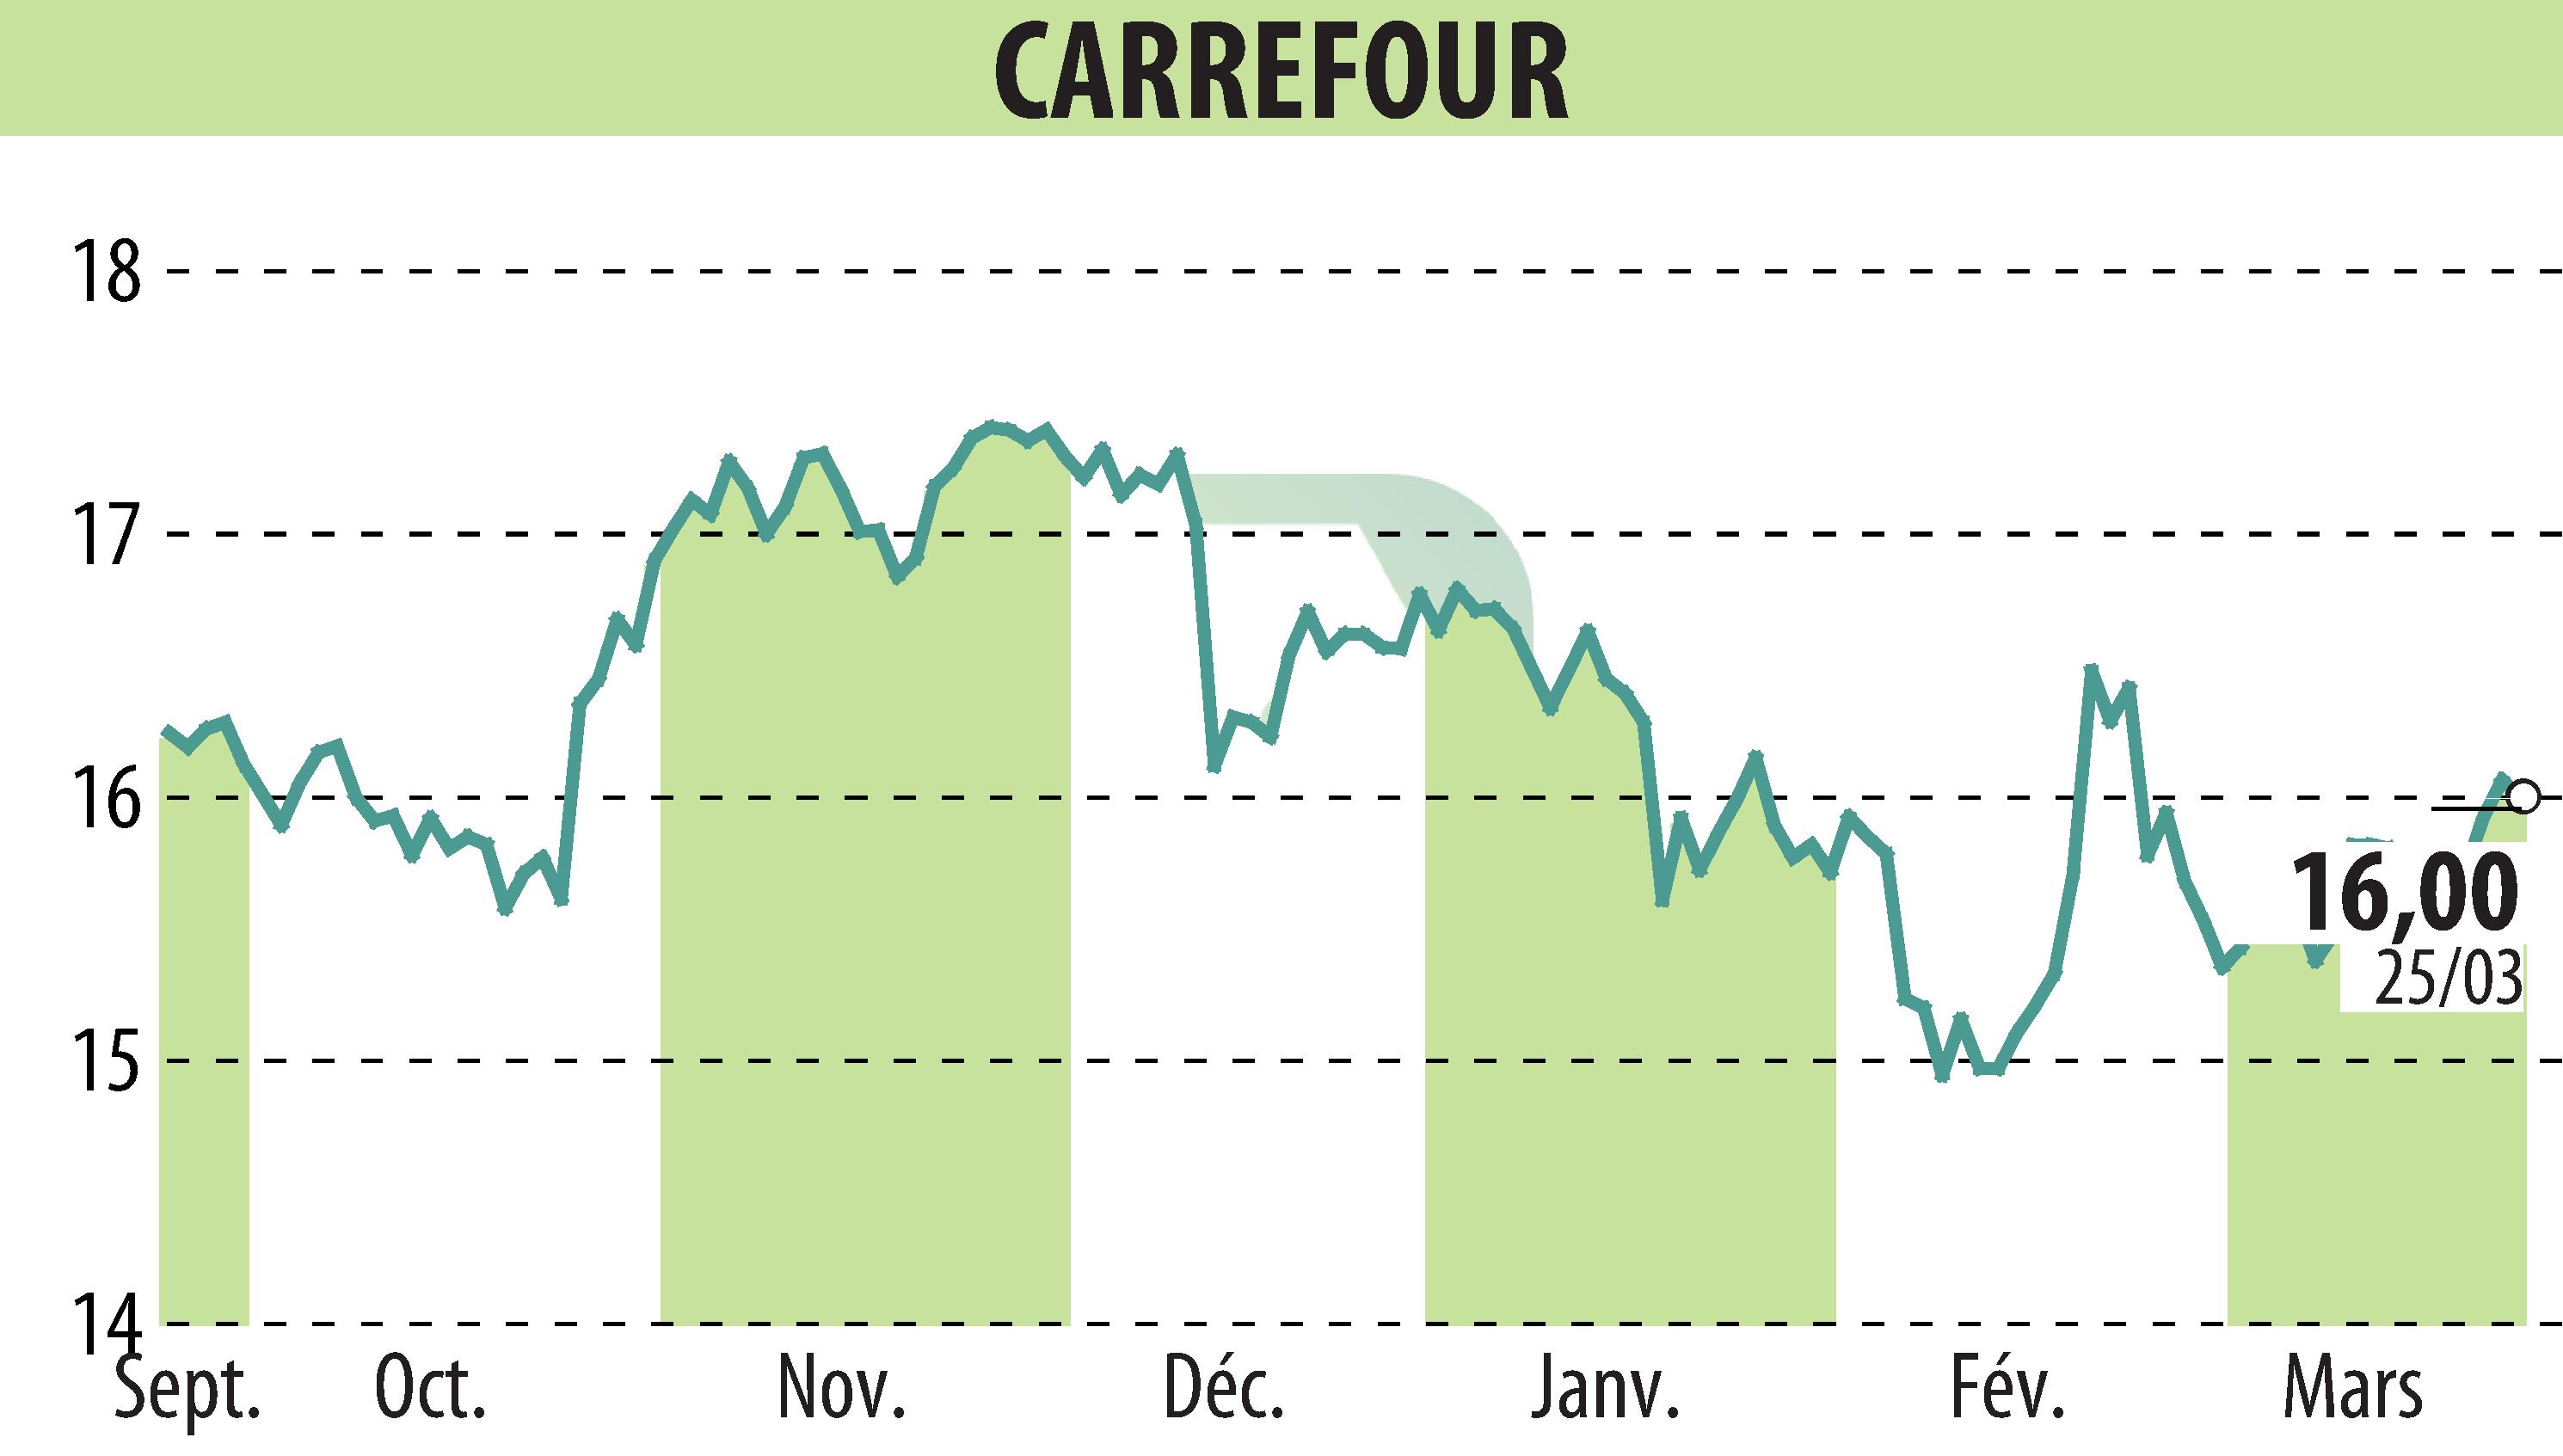 Stock price chart of CARREFOUR (EPA:CA) showing fluctuations.